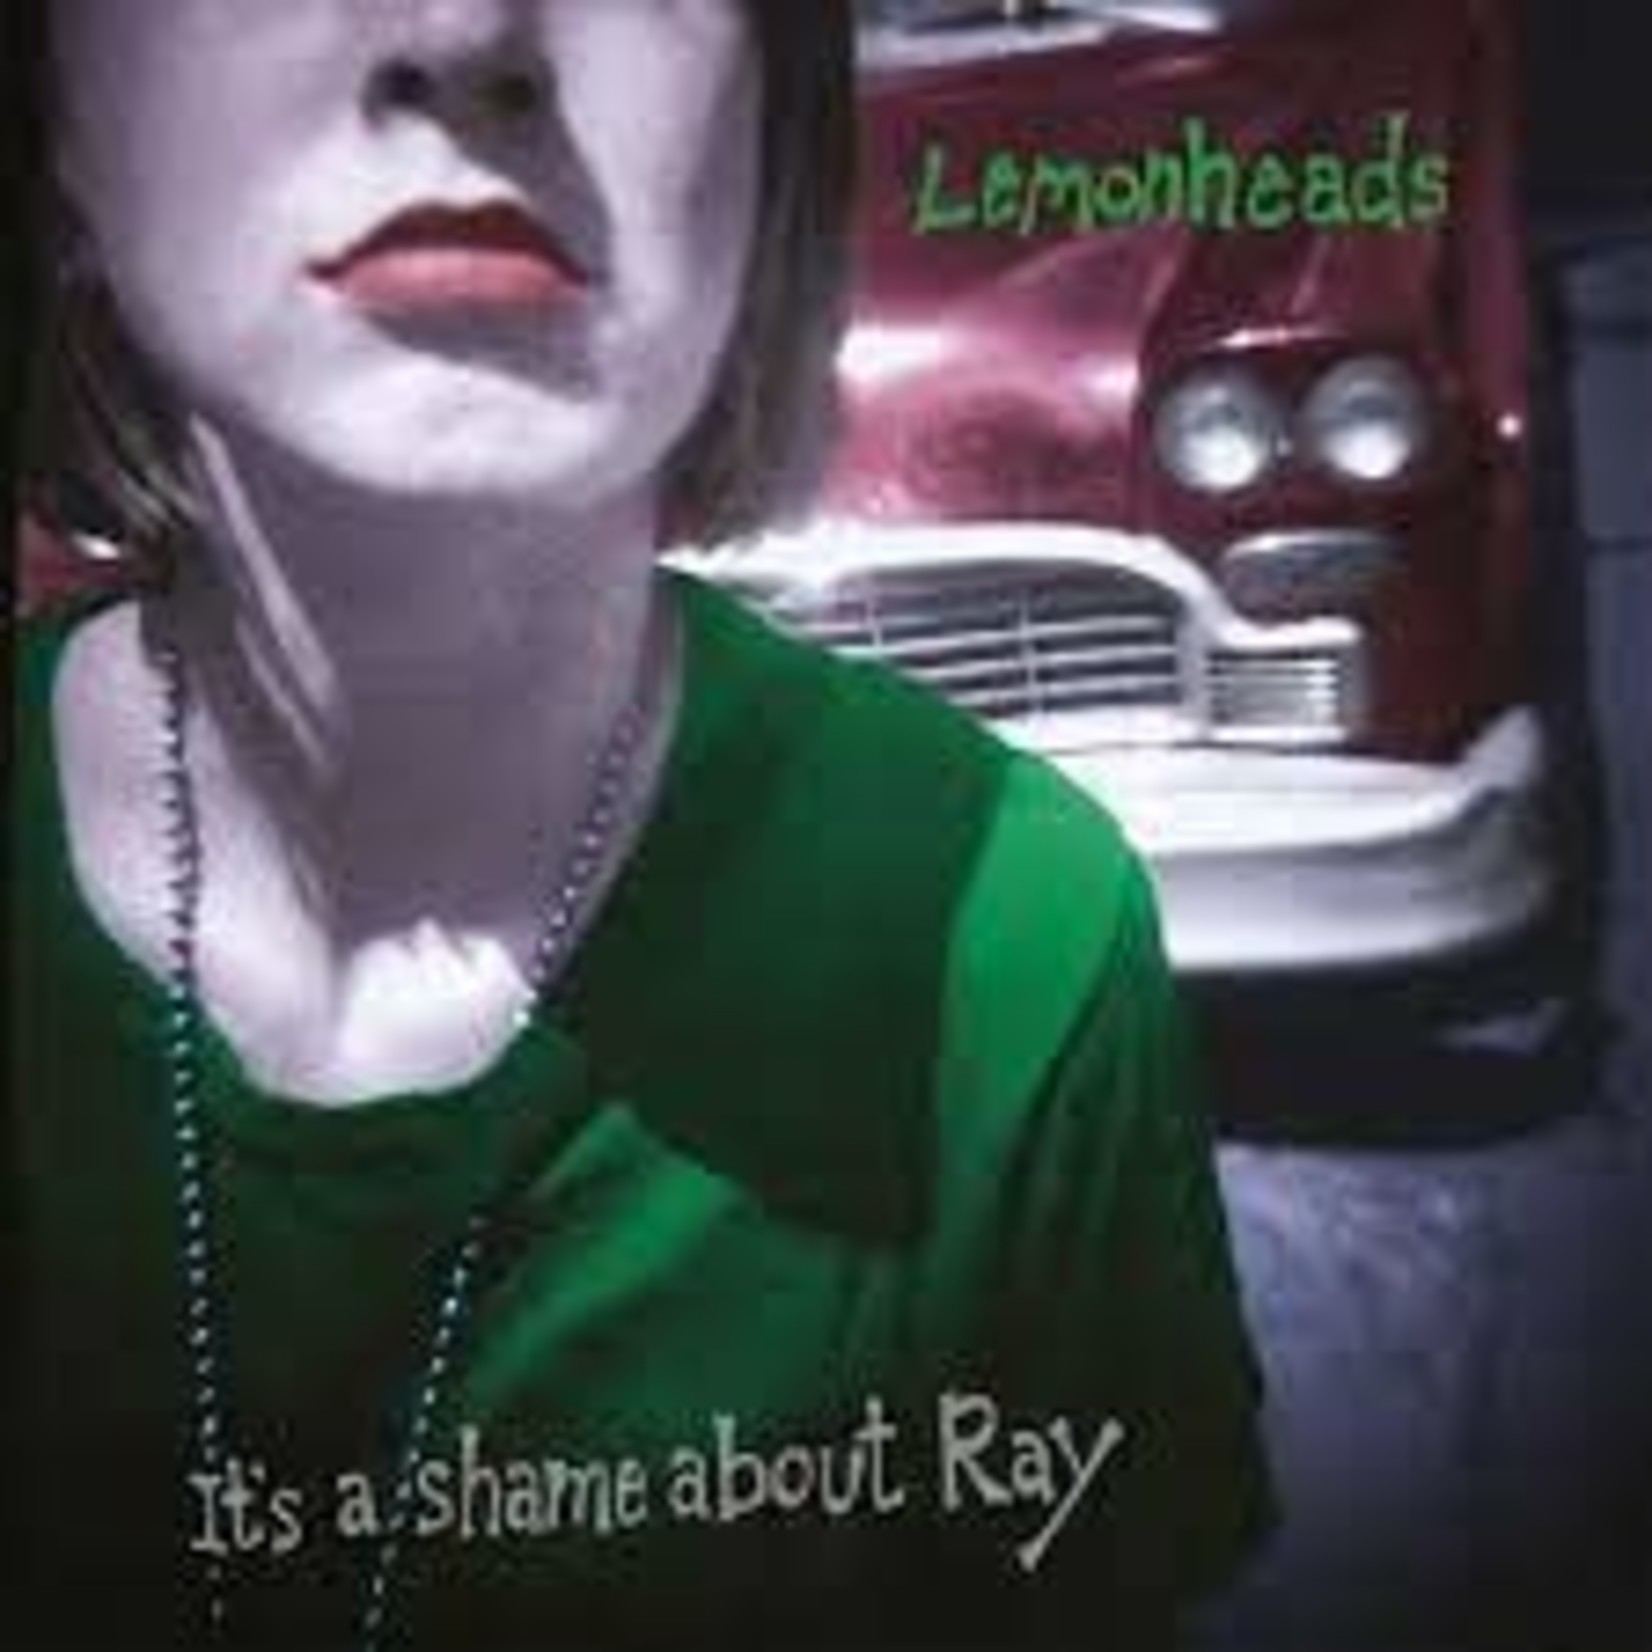 [New] Lemonheads - It's a Shame About Ray (2LP+book, 30th Anniversary Edition)